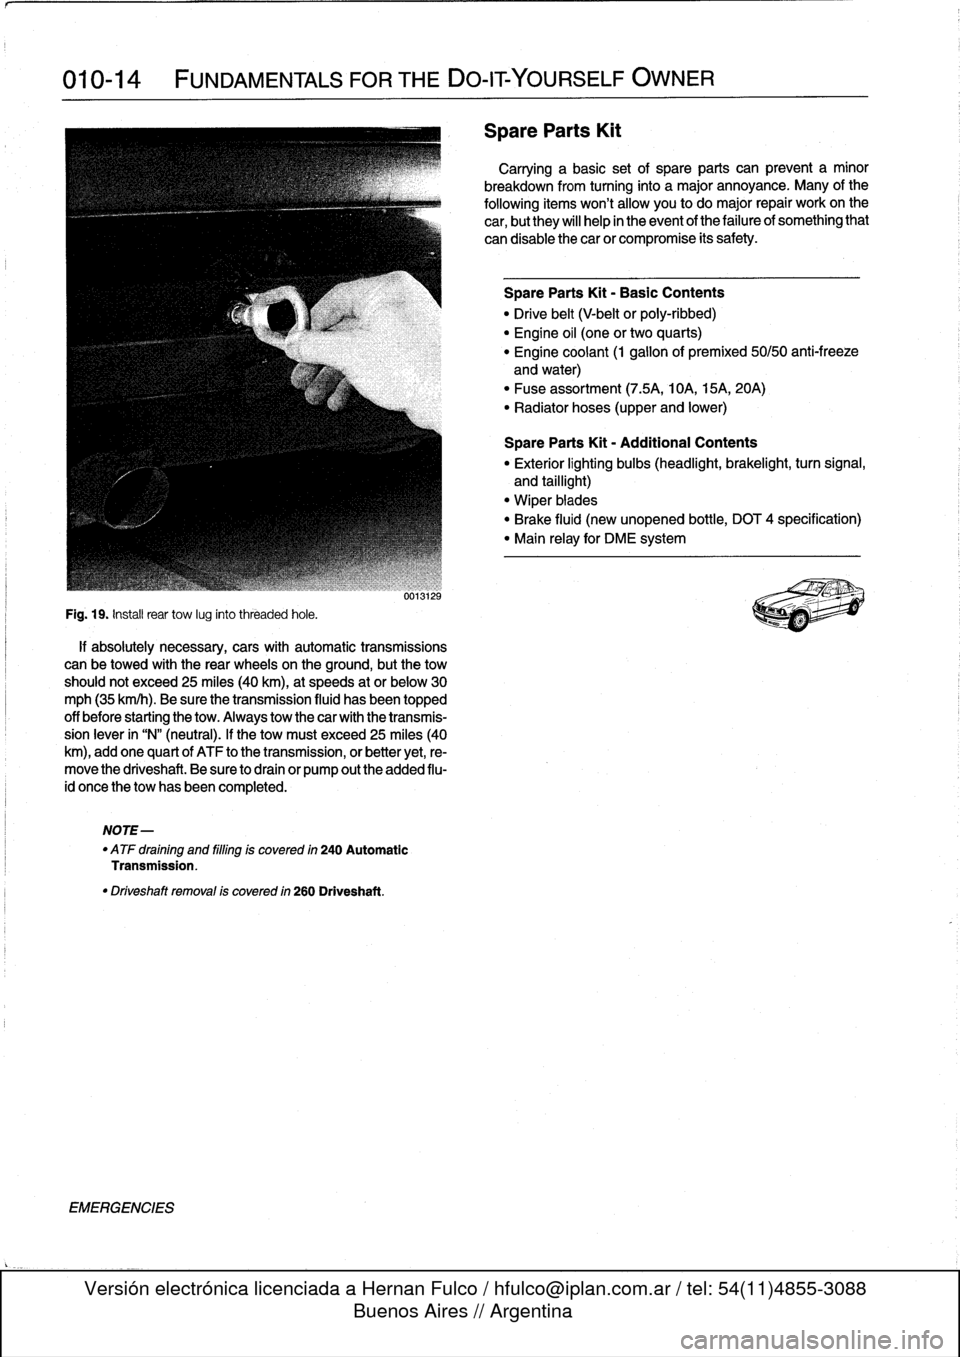 BMW 328i 1993 E36 Workshop Manual 
010-14

	

FUNDAMENTALS
FOR
THE
DO-ITYOURSELF
OWNER

Fig
.
19
.
Instaf
rear
tow
lug
into
threaded
hole
.

if
absolutely
necessary,
cars
with
automatic
transmissions
can
be
towed
with
the
rear
wheels
